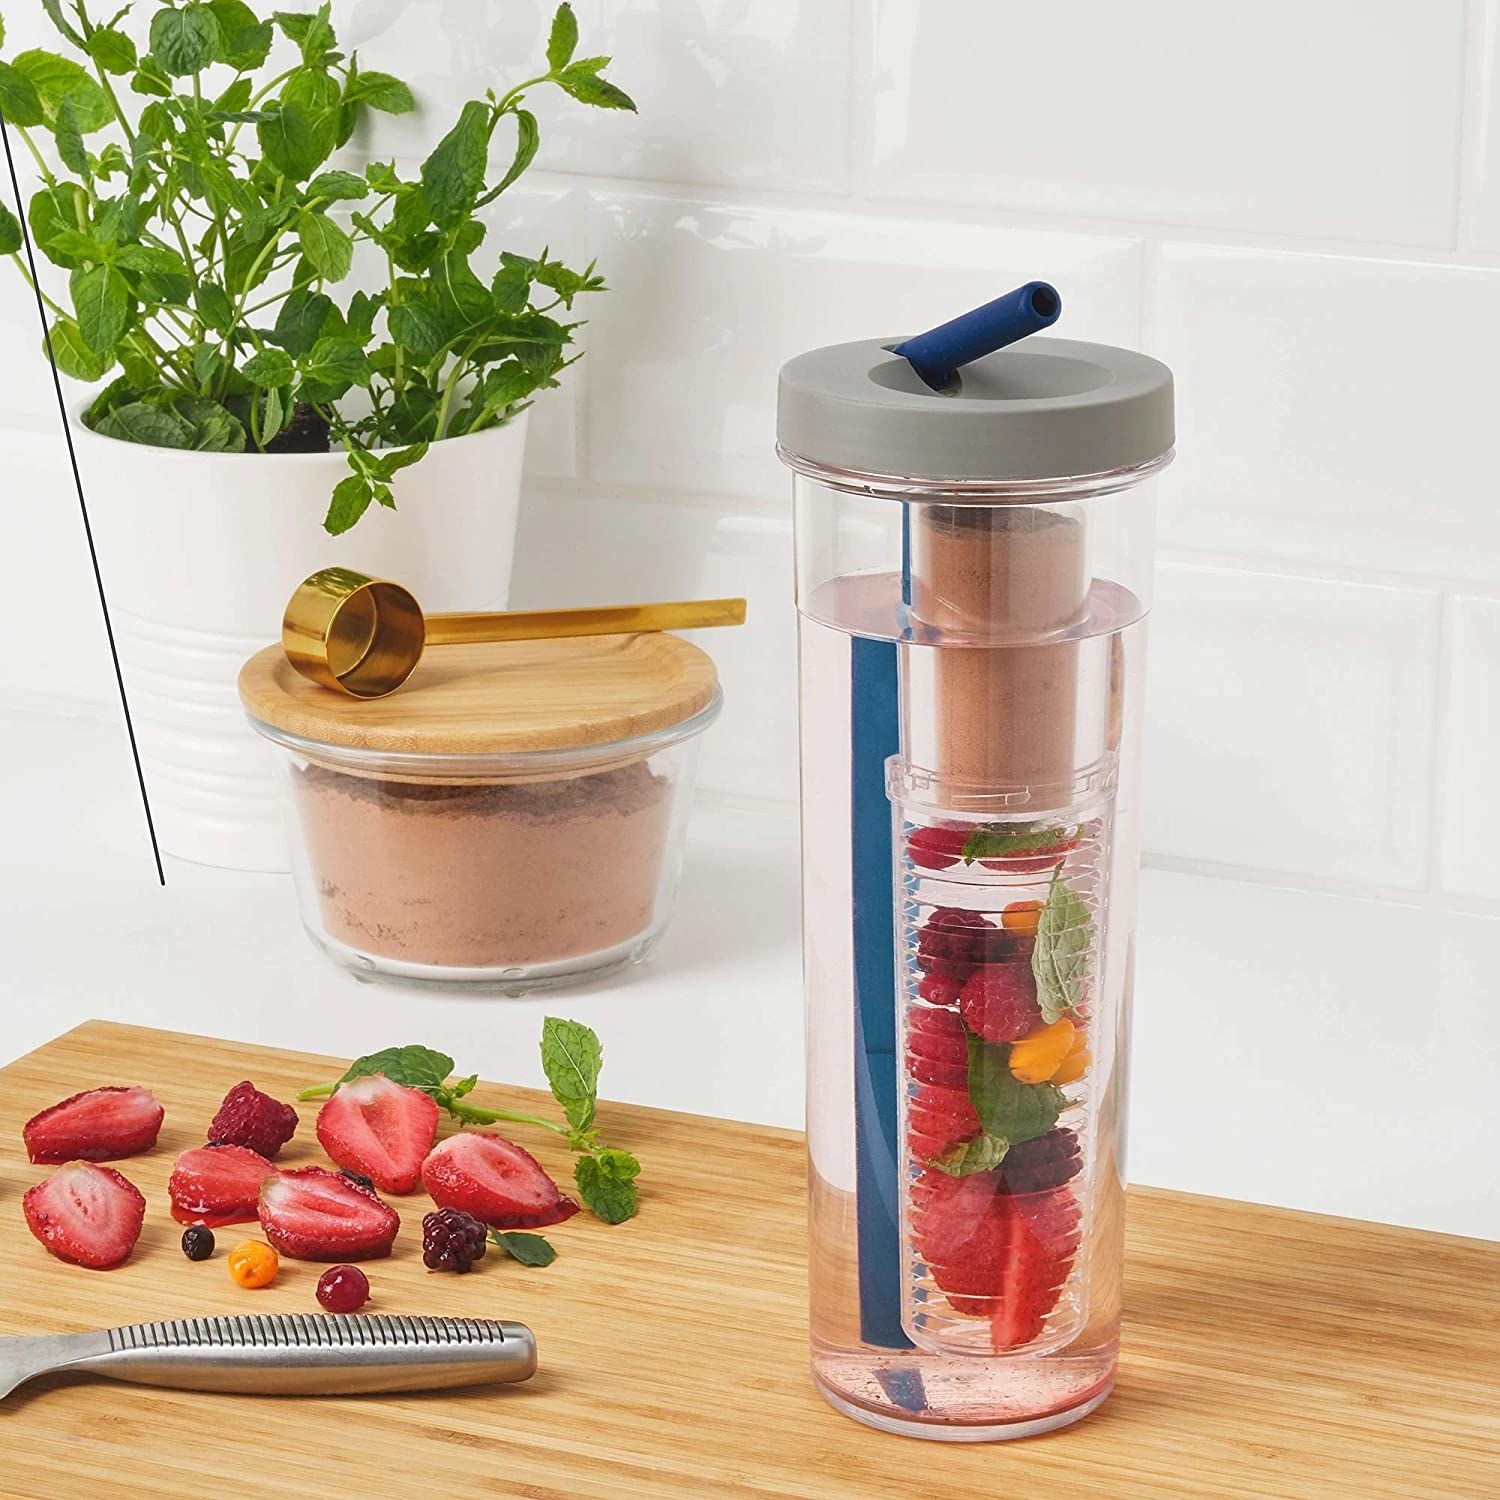 The infuser bottle pictured with water and fruits inside it.